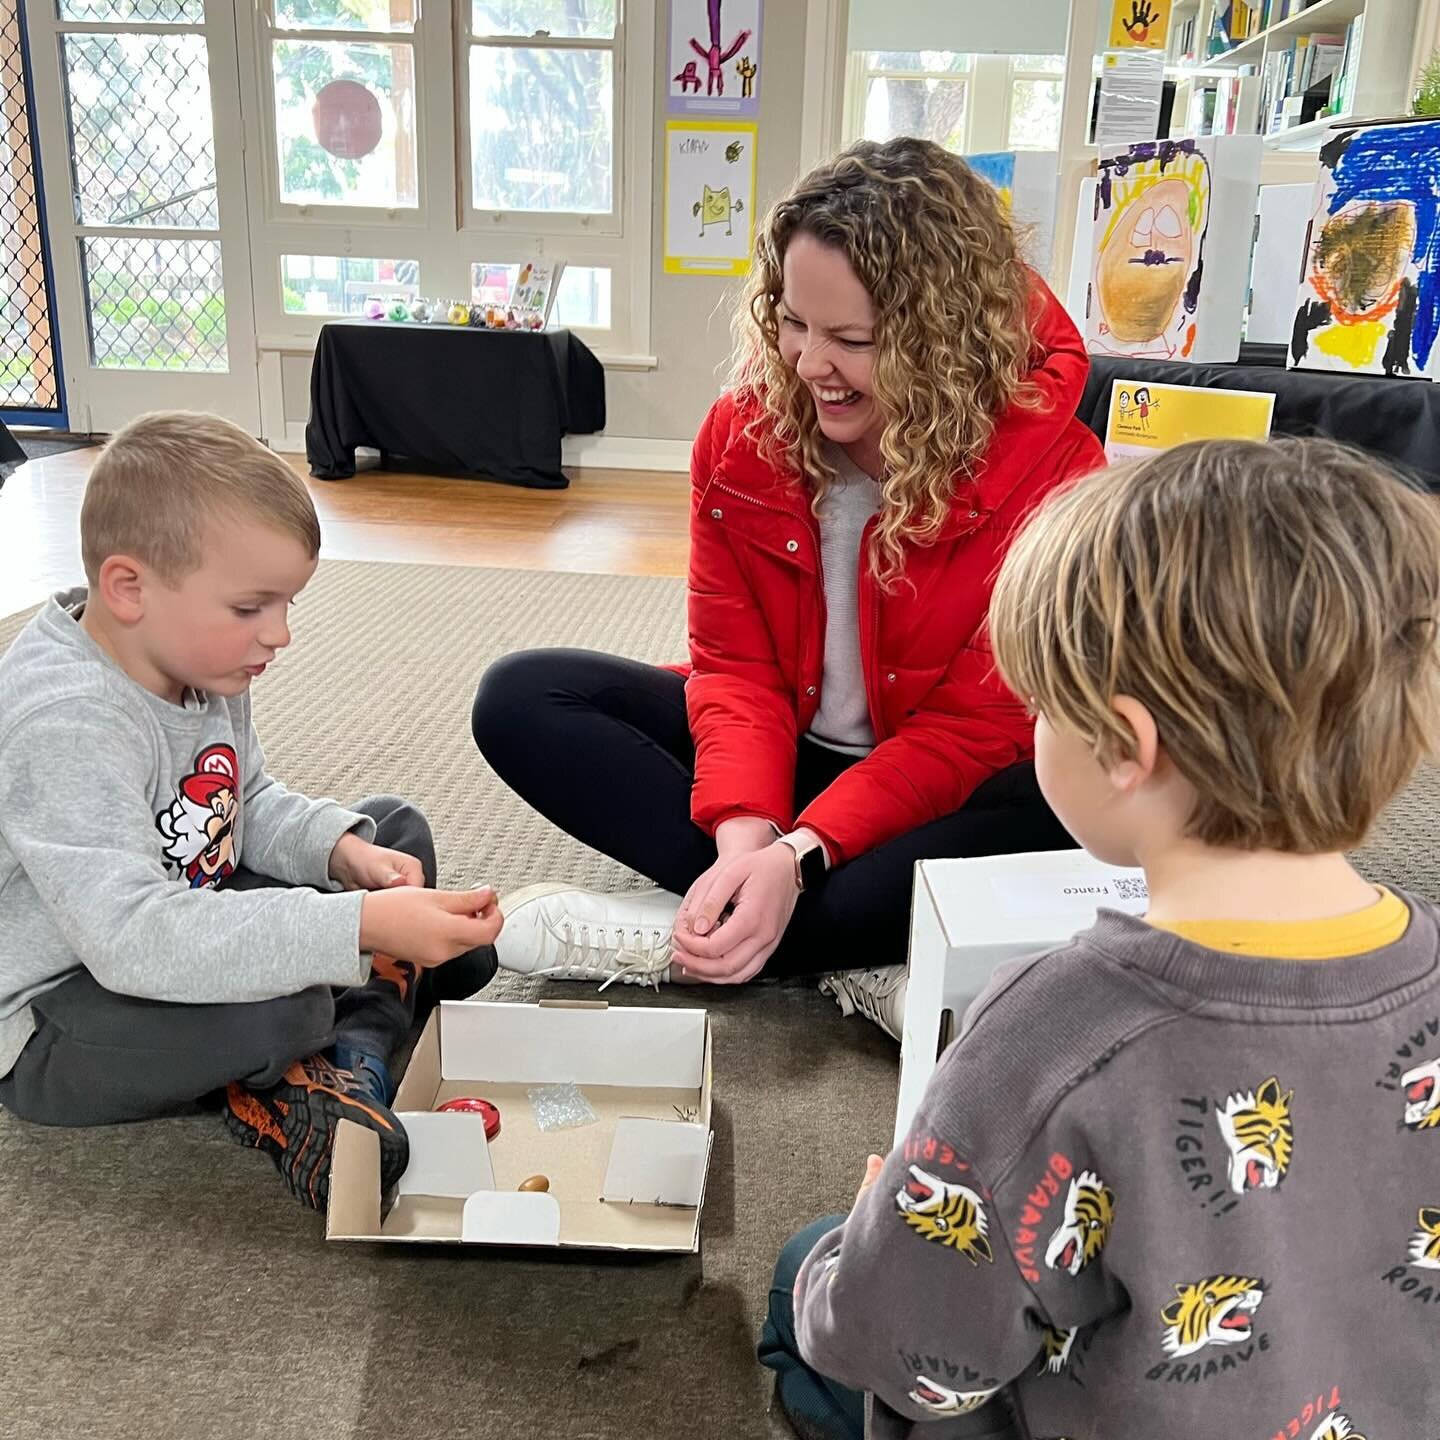 Current preschool hours don&rsquo;t always meet the needs of working parents 🚸

So from July this year, we&rsquo;ll begin trialling &lsquo;Kindy Care&rsquo; to provide out of hours preschool care for children at 20 locations across South Australia -